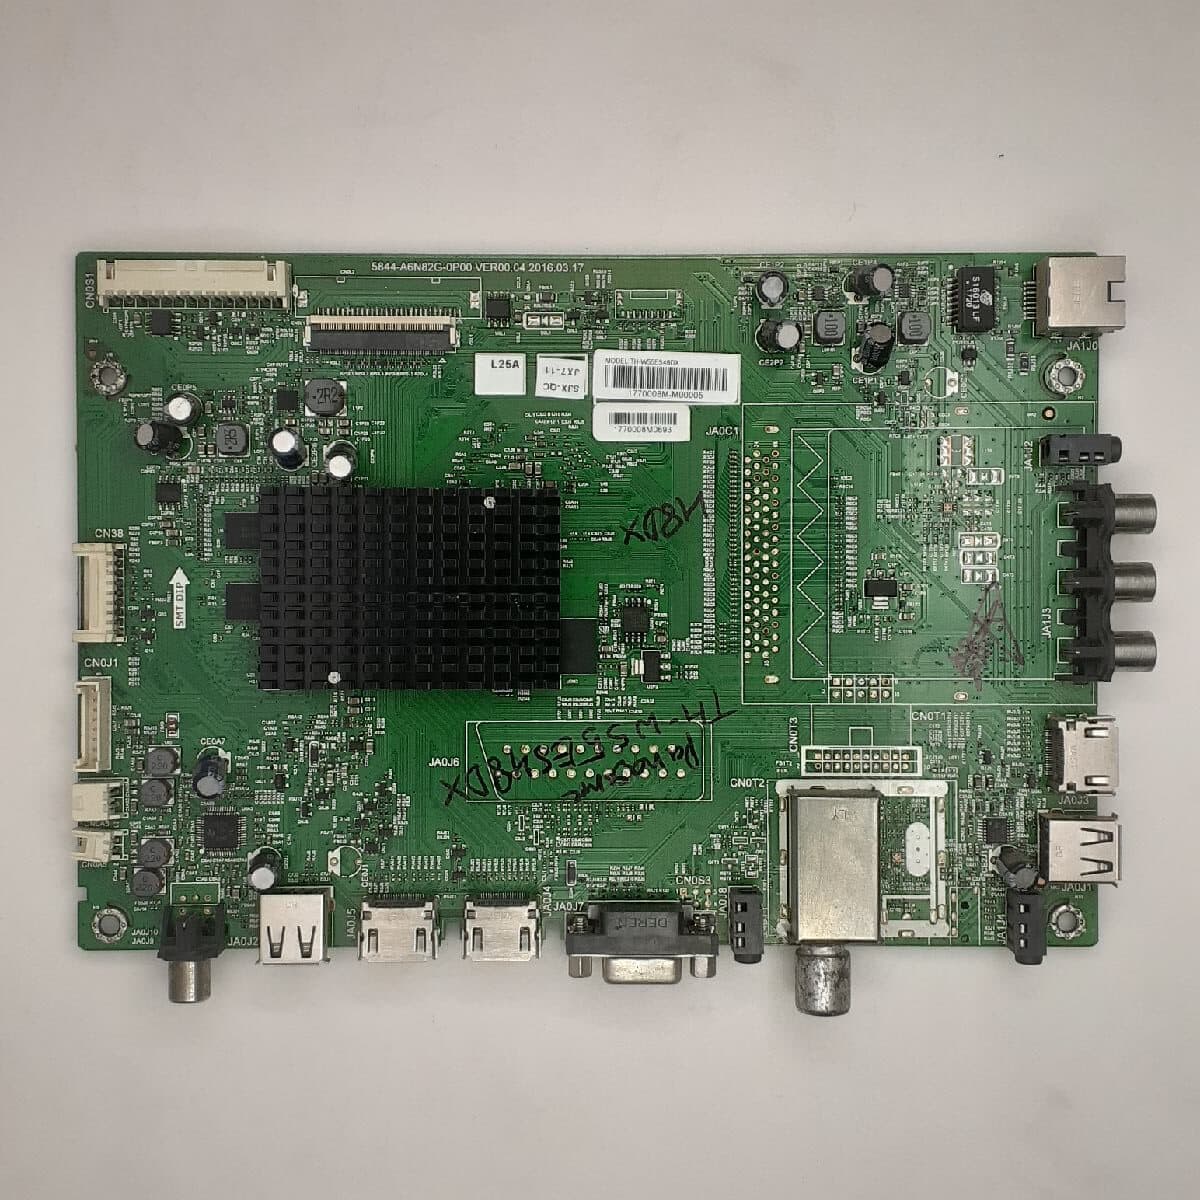 TH-W55ES48DX PANASONIC MOTHERBOARD FOR LED TV